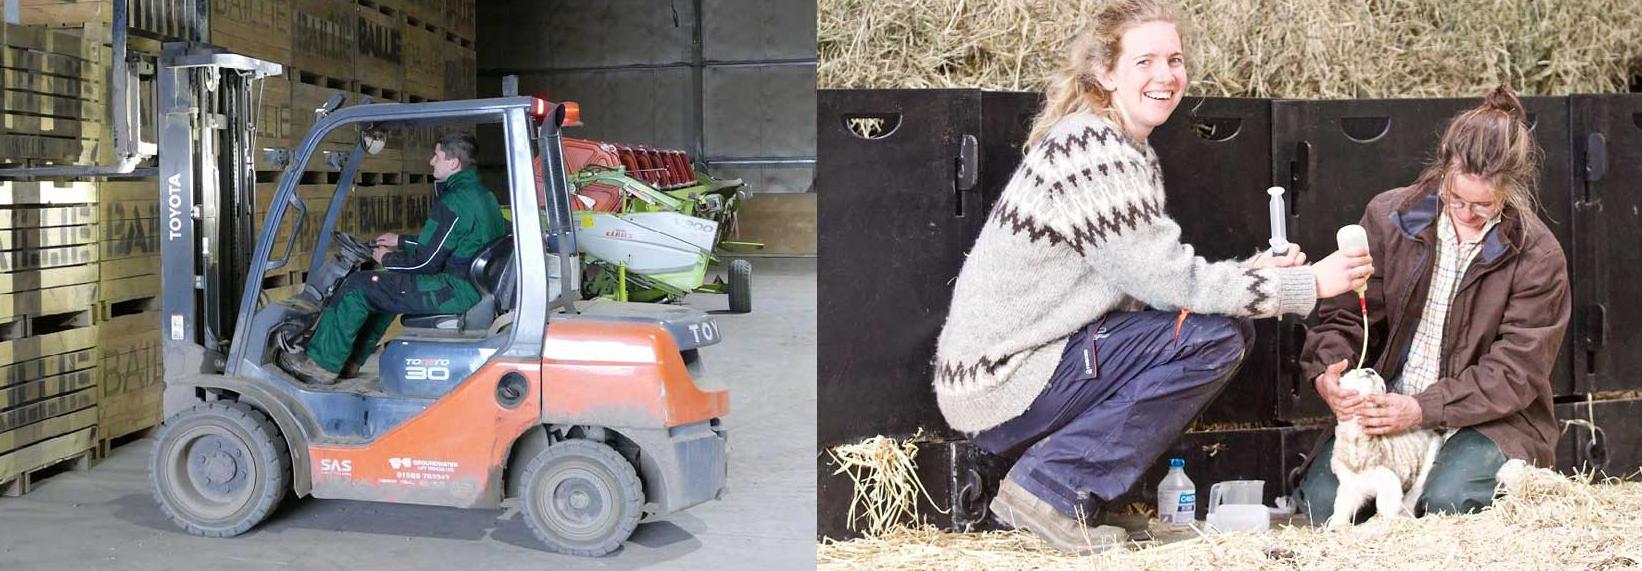 Forklift driver and people lambing